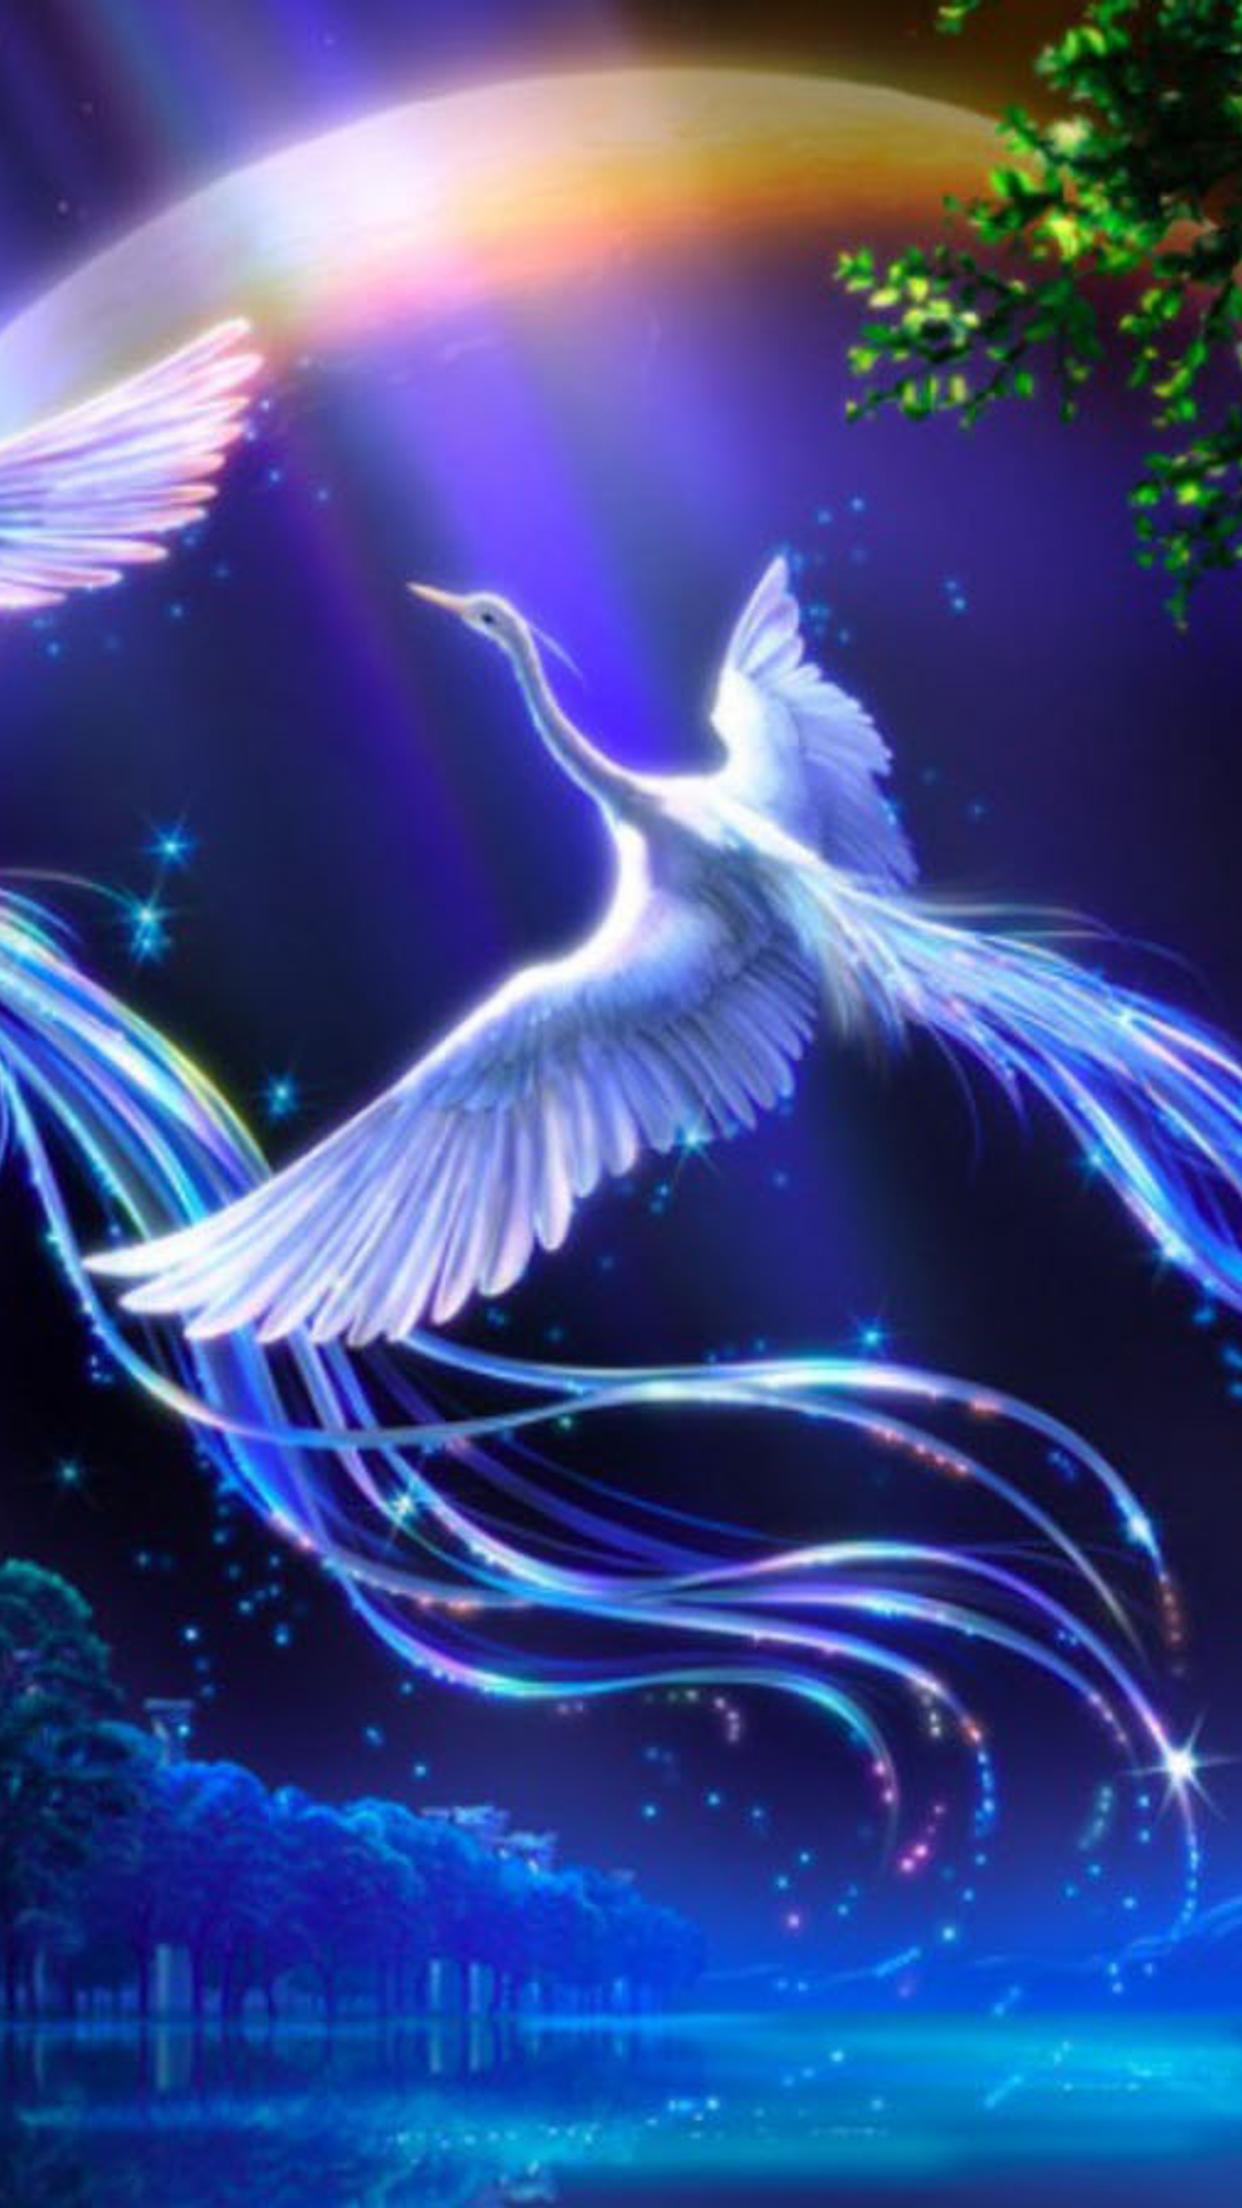 Two artistic white birds flying in the night